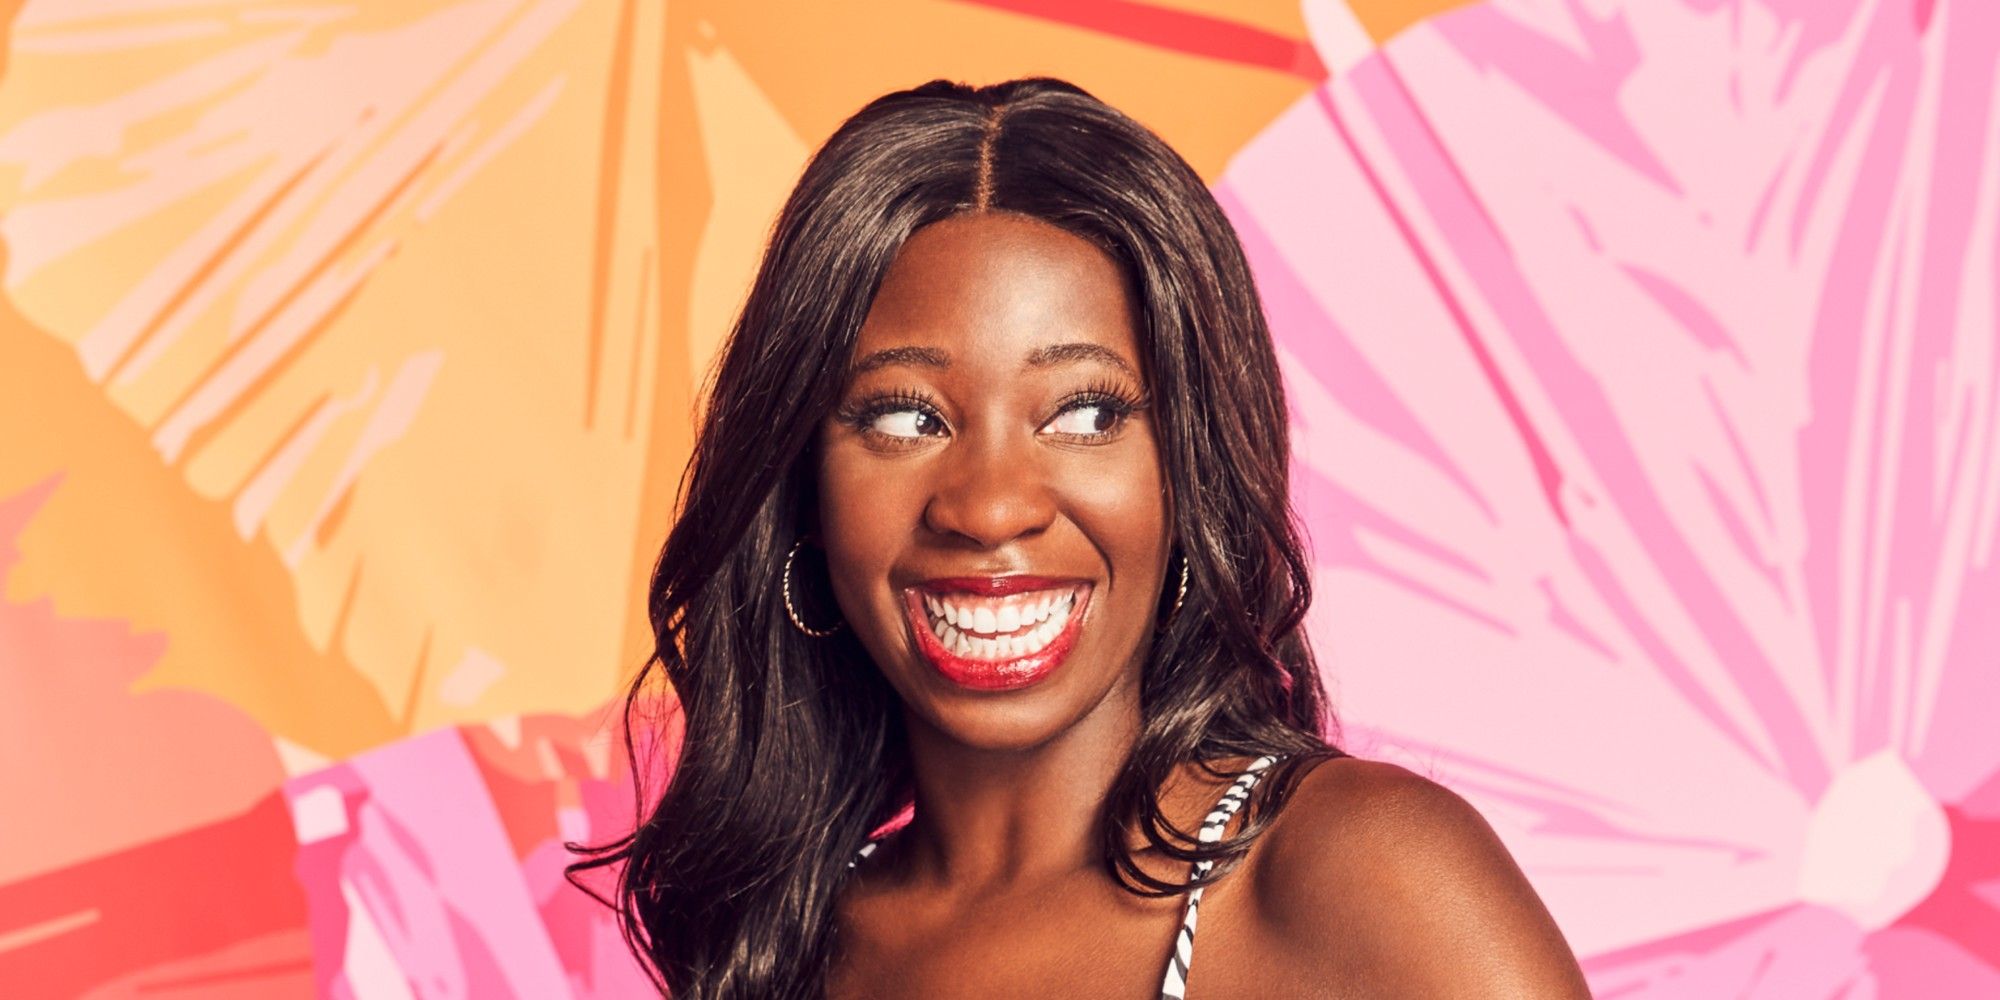 Cashay Proudfoot smiling on a photo for Love Island USA season 3